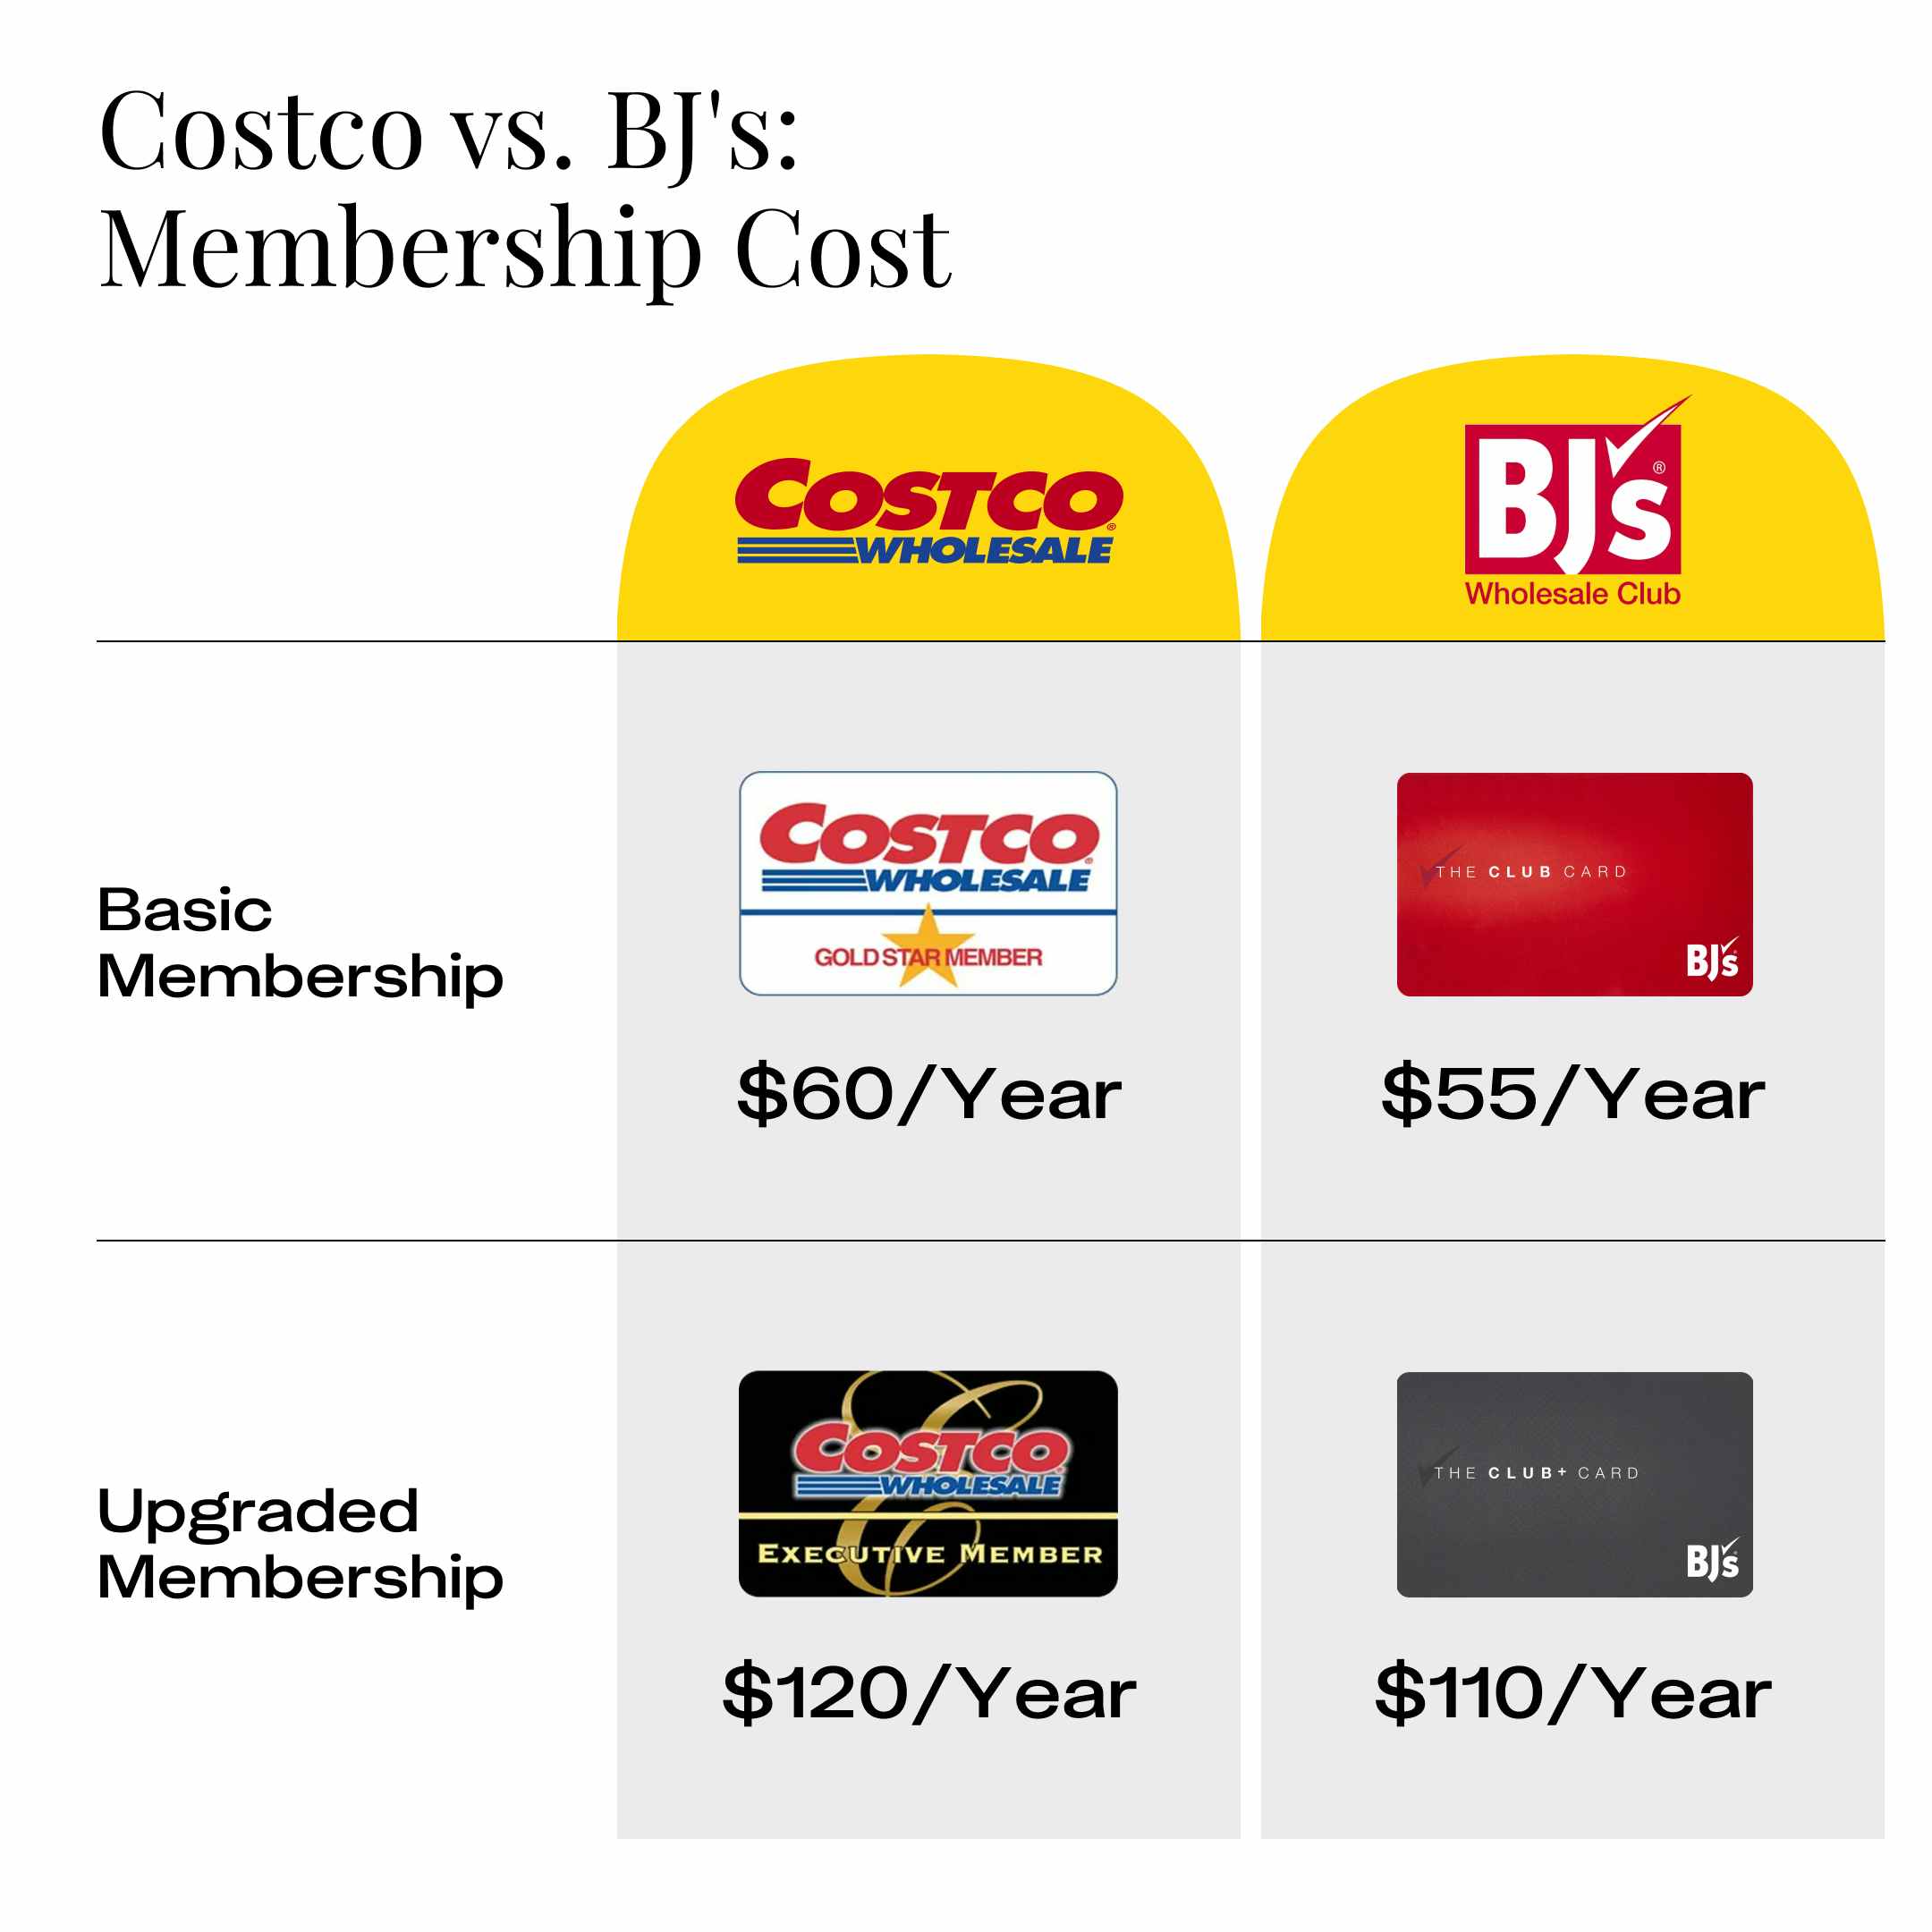 Comparison of the membership costs of Costco vs BJs for their basic and upgraded memberships.